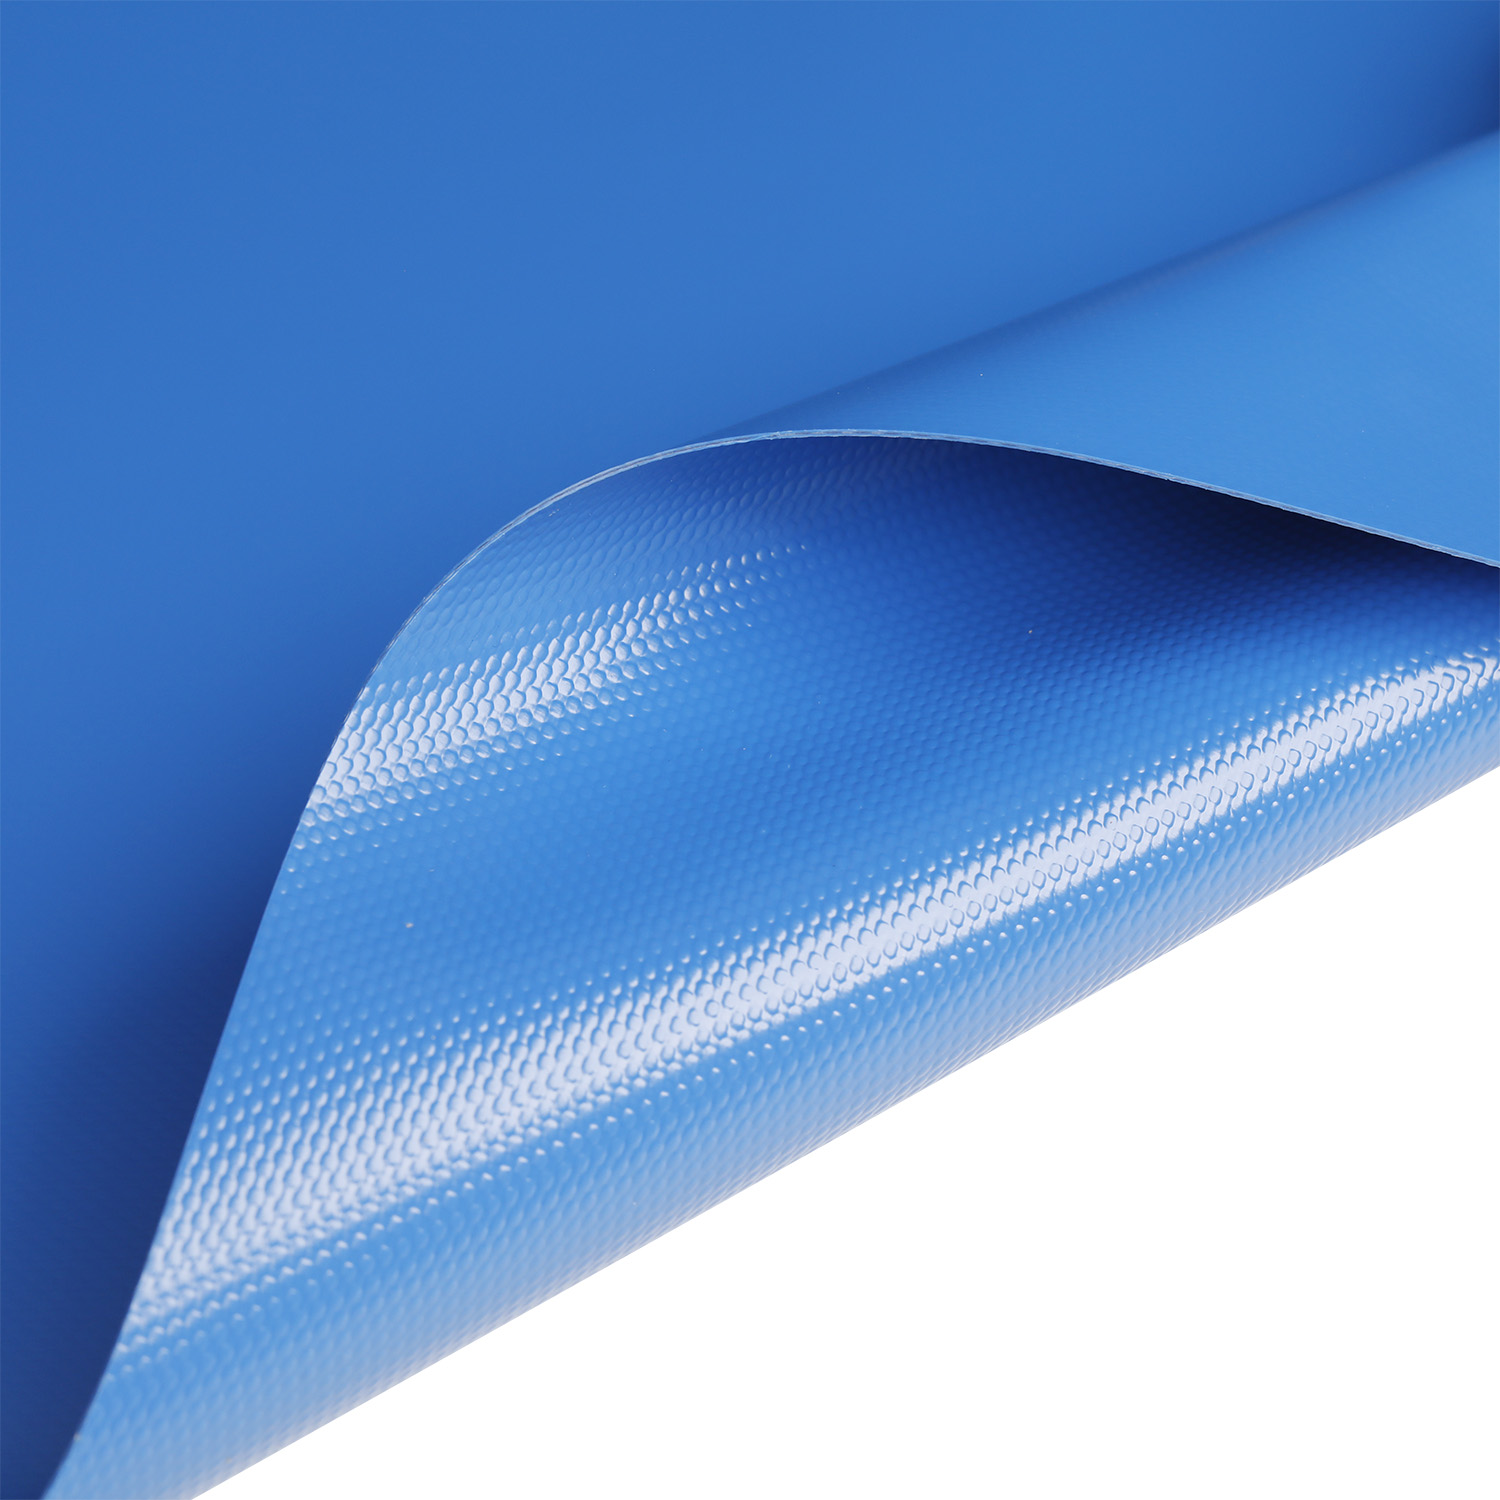 Yatai Textile: Leading Manufacturer and Supplier of High-Quality PVC and PE Tarpaulins